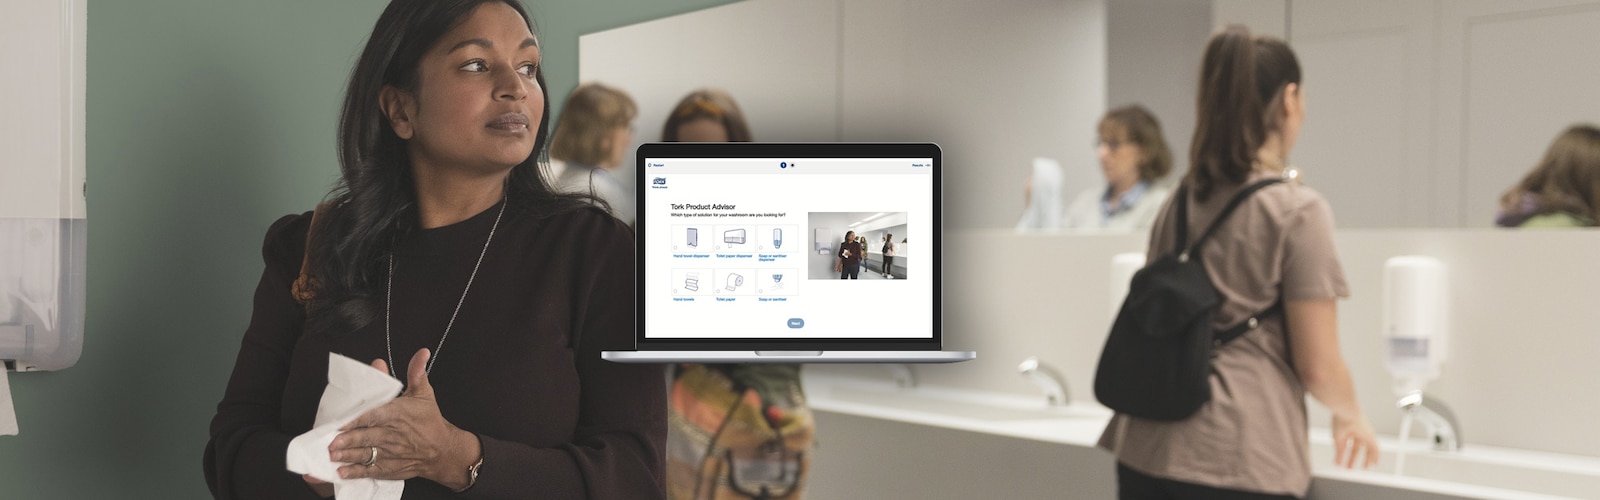 Women in a public washroom washing and drying their hands; in front, a laptop showing the Tork Product Advisor Tool